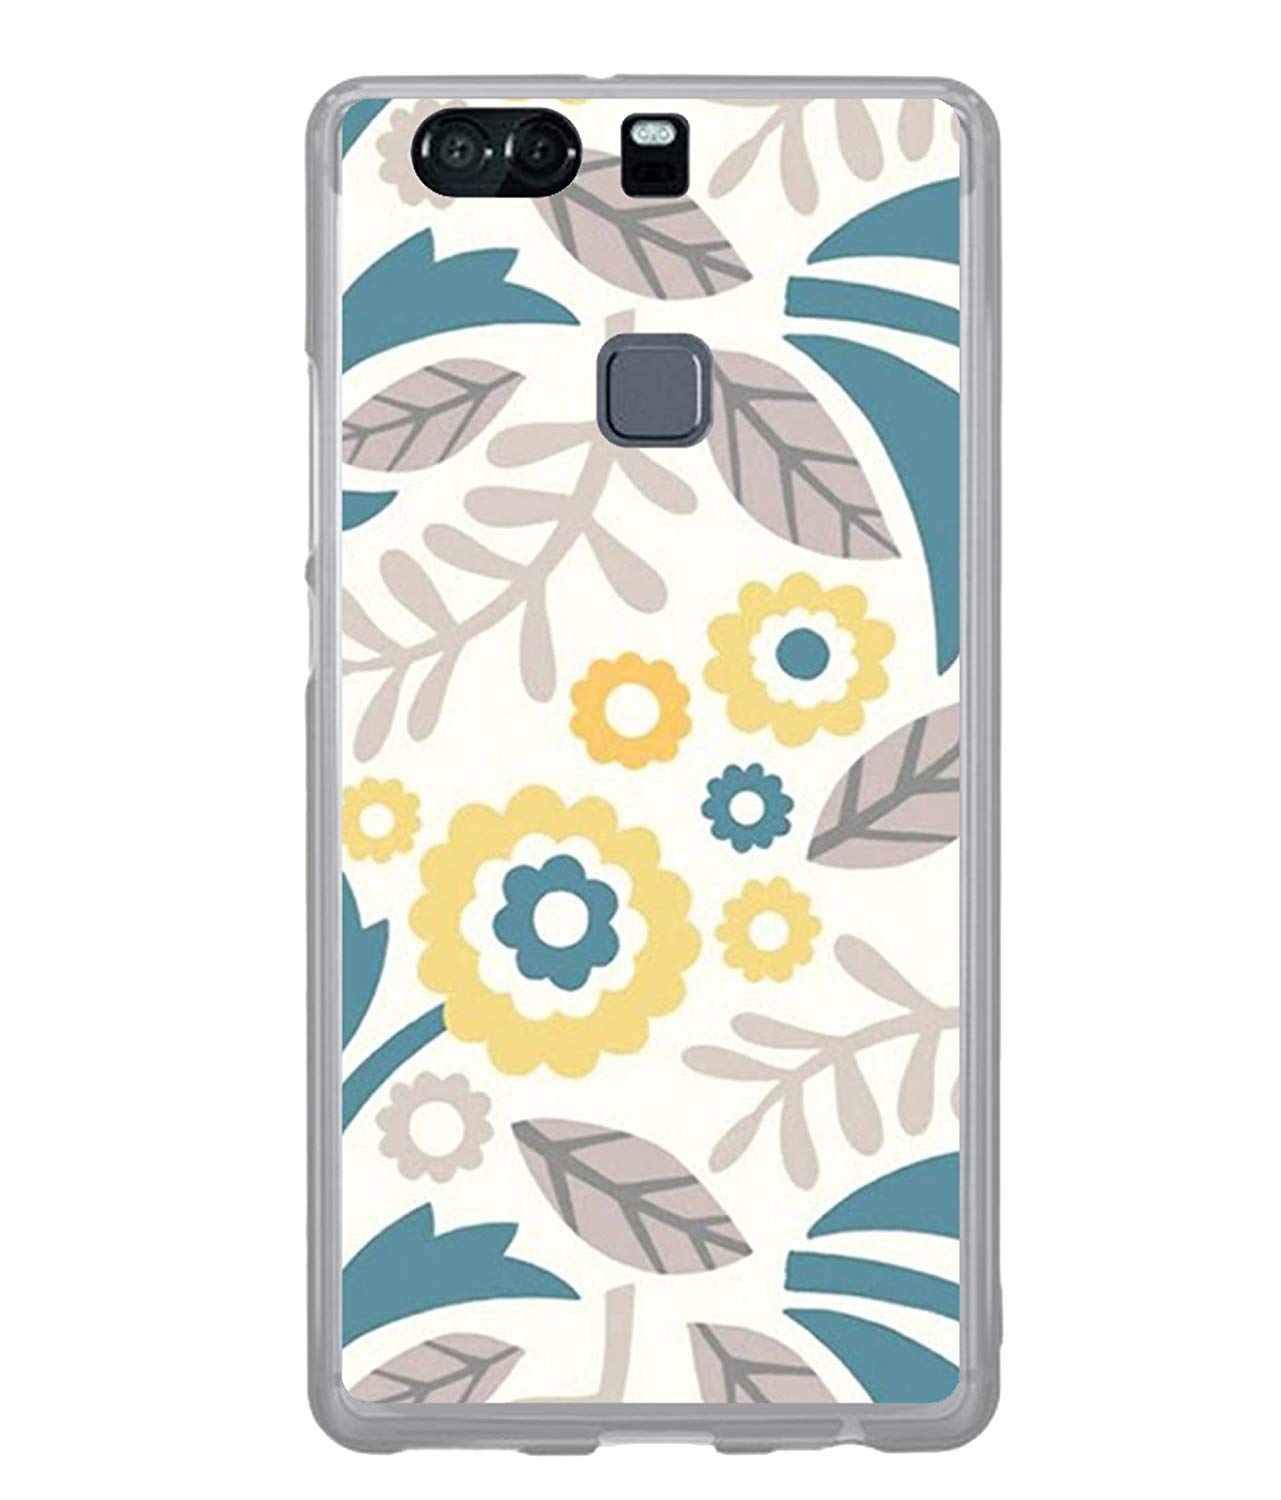 Fuson Designer Back Case Cover for Huawei P9: Amazon.in.